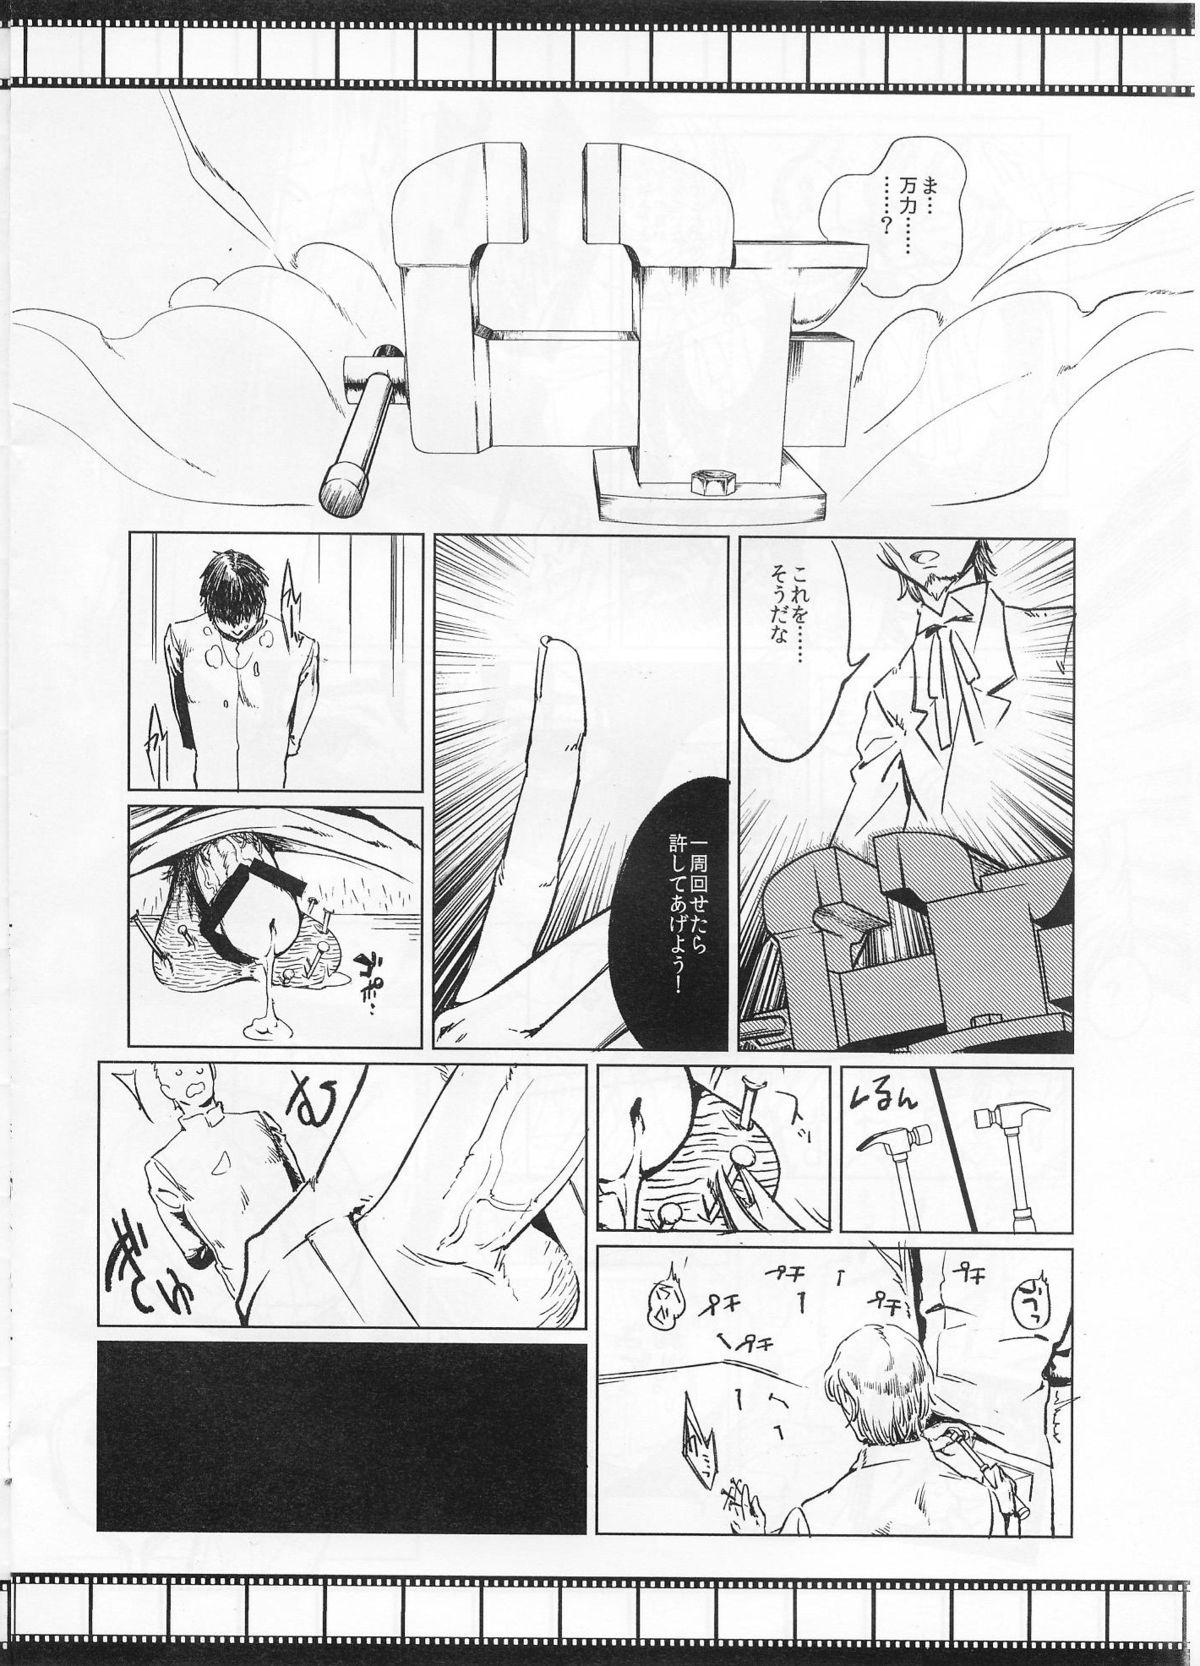 Real Sex Lost - Fate zero Hot Girls Fucking - Page 9